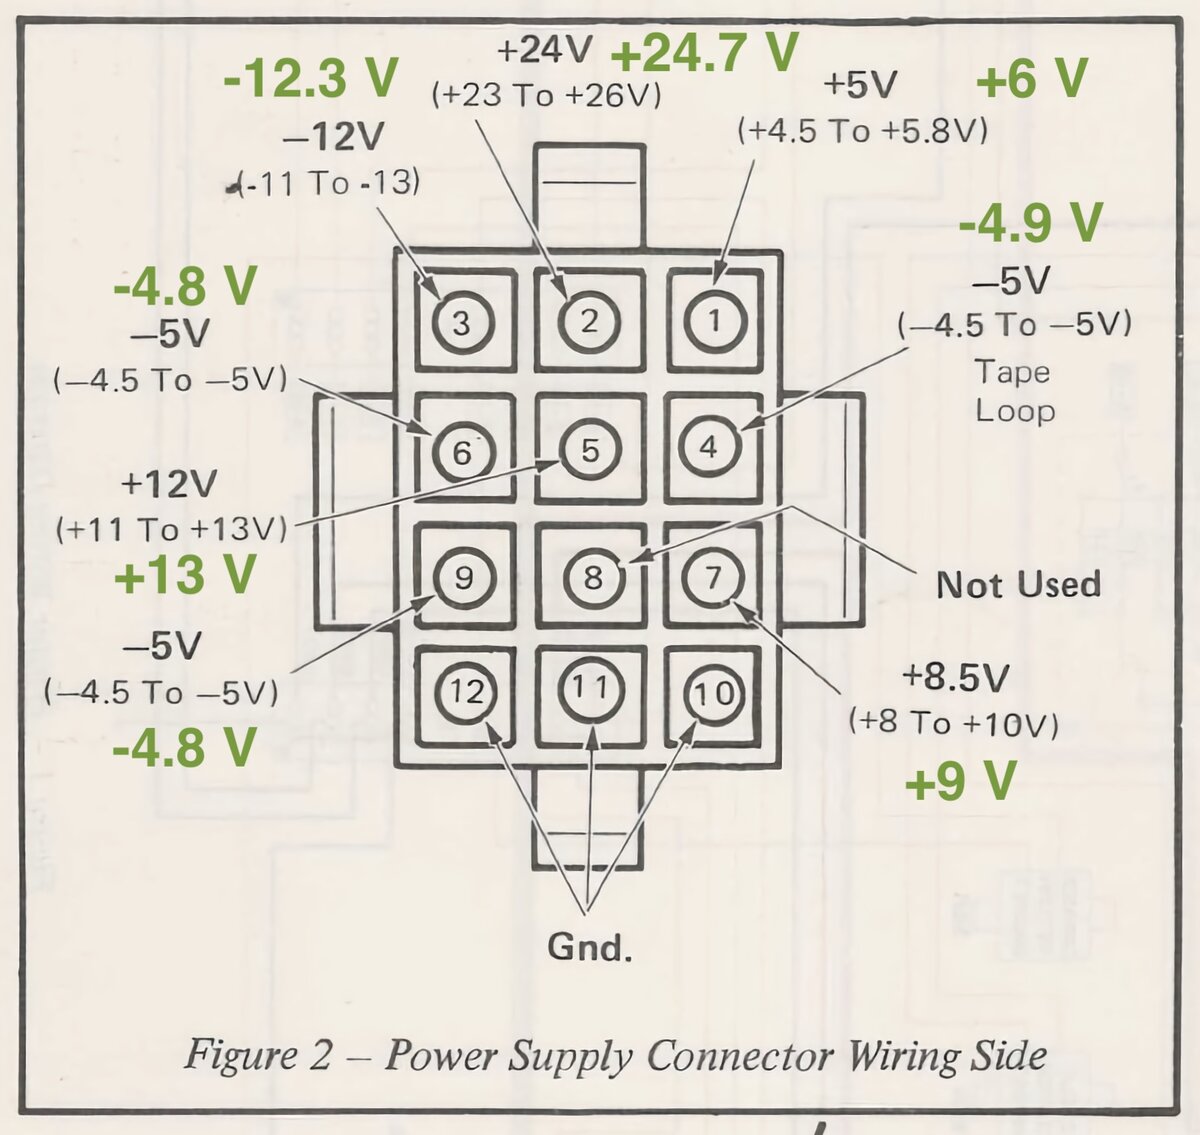 Voltages as specified and measured